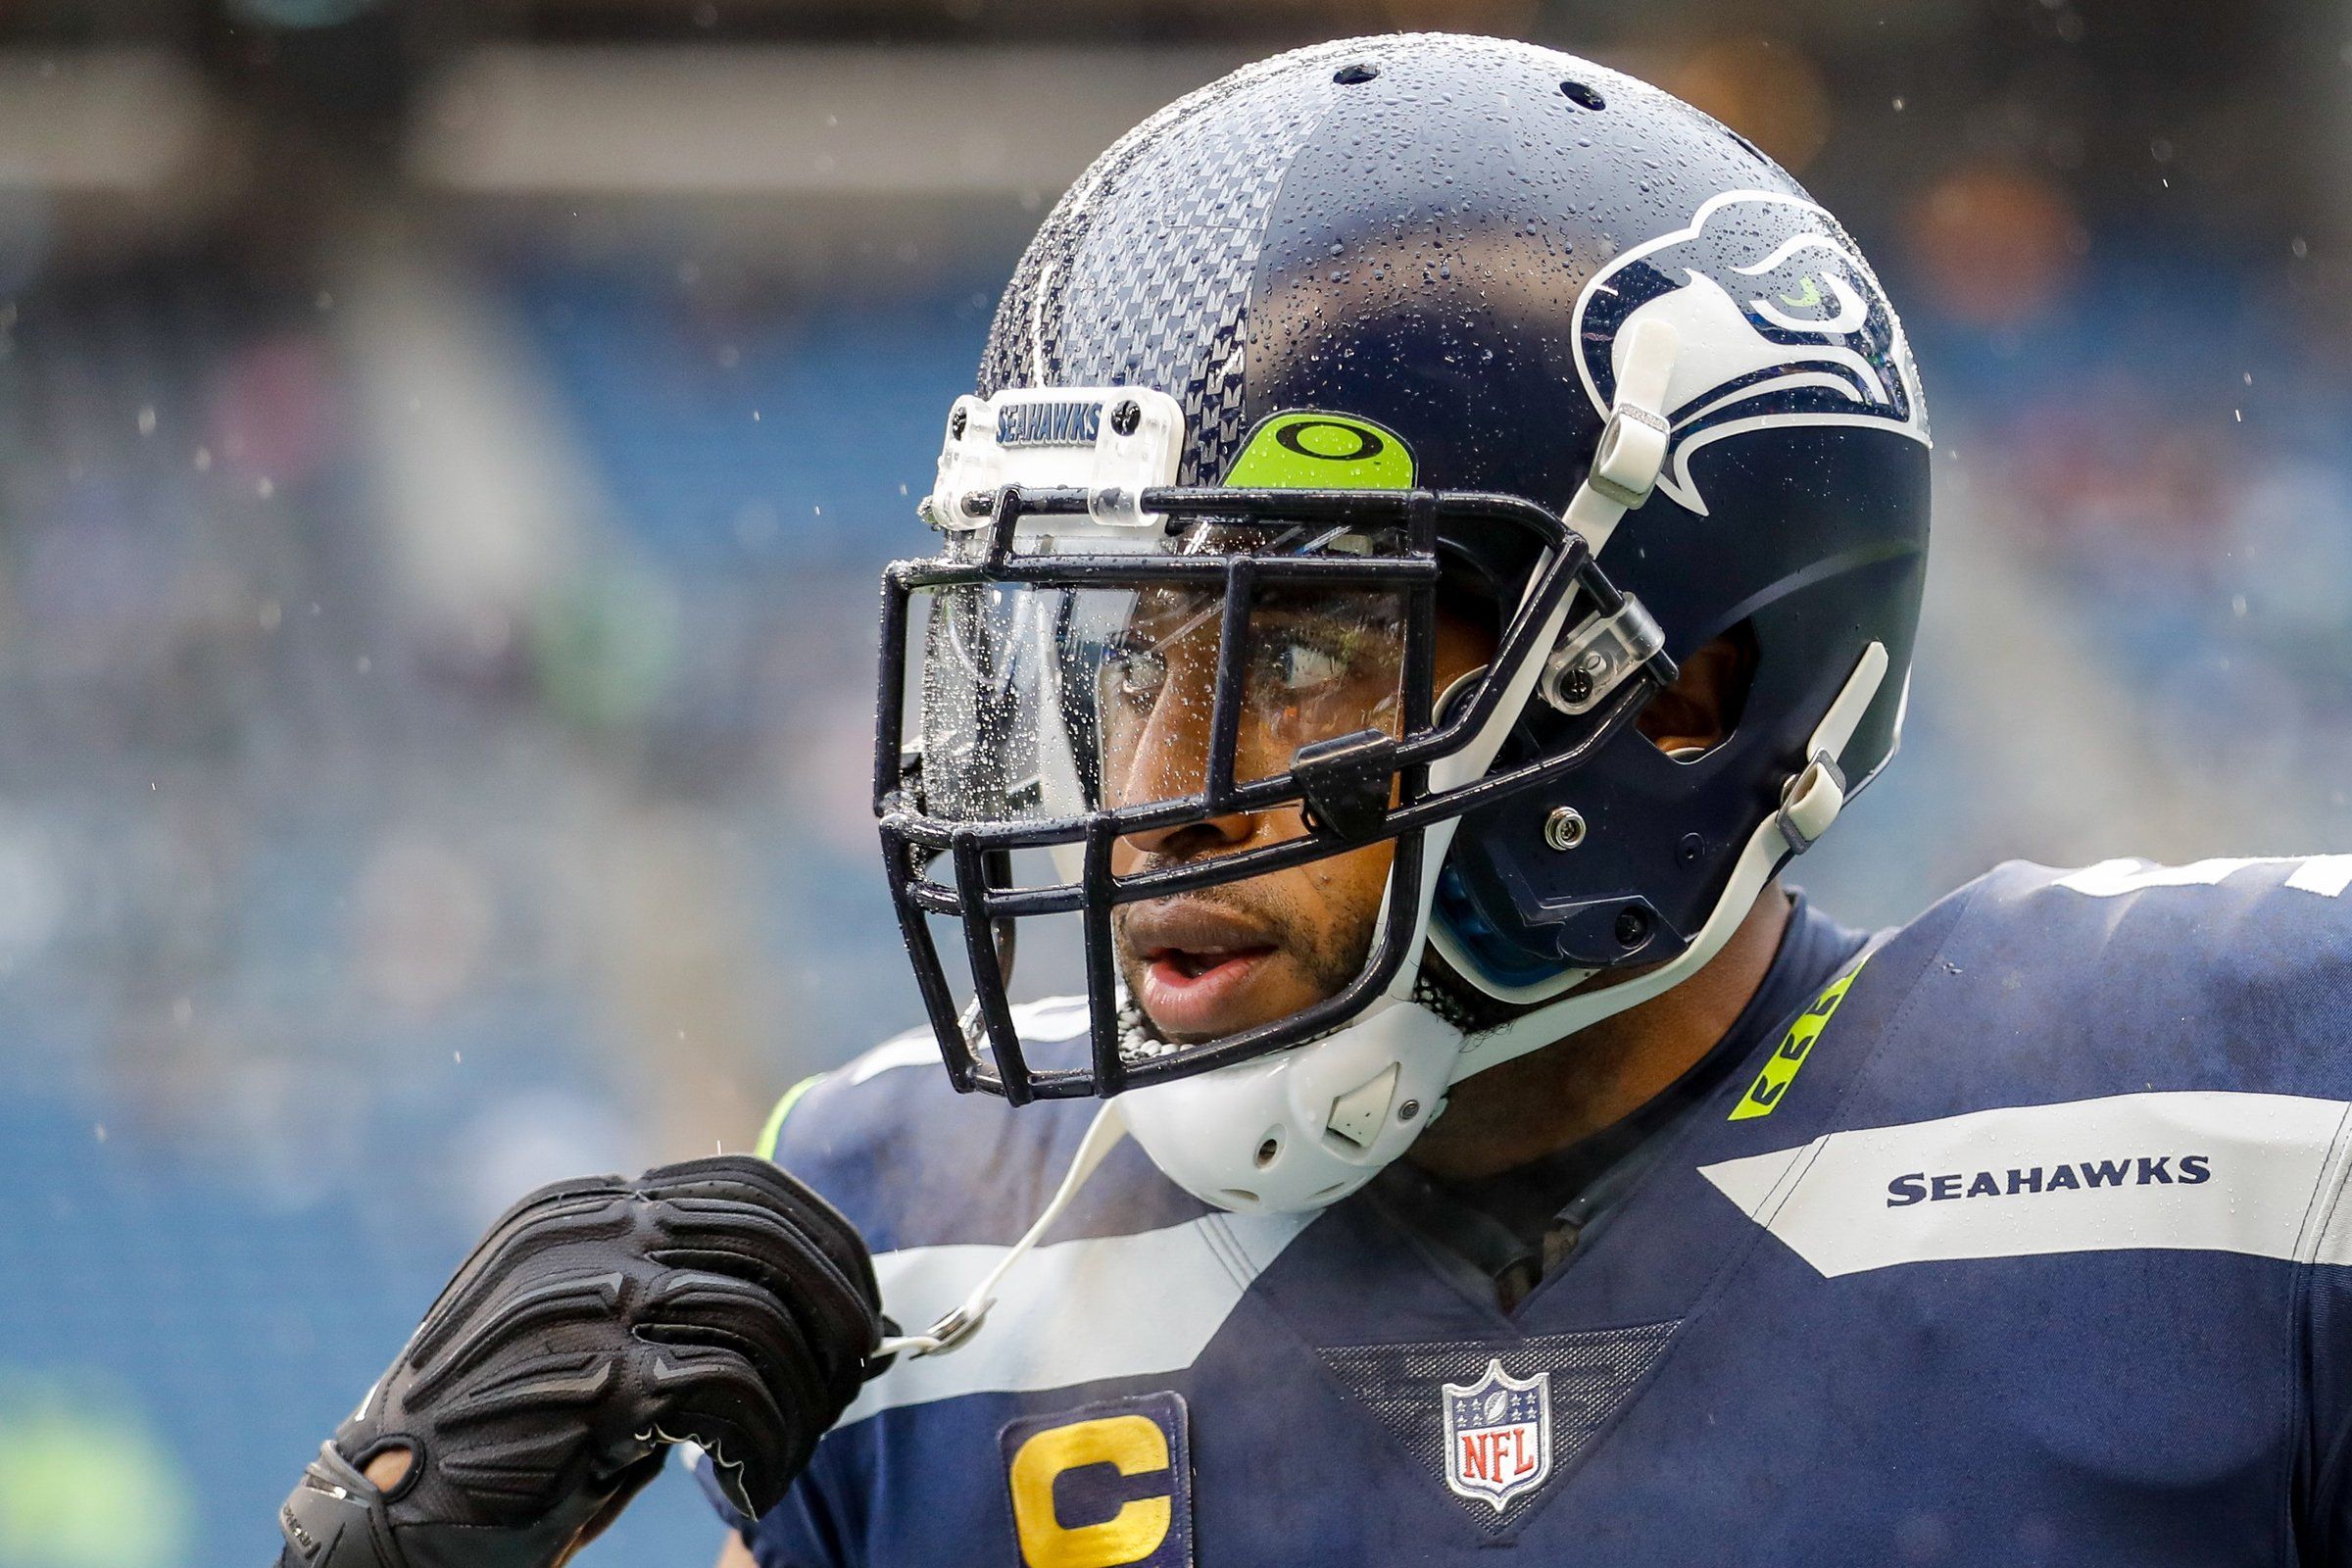 Seahawks LB Bobby Wagner hopes he'll be able to play Sunday at